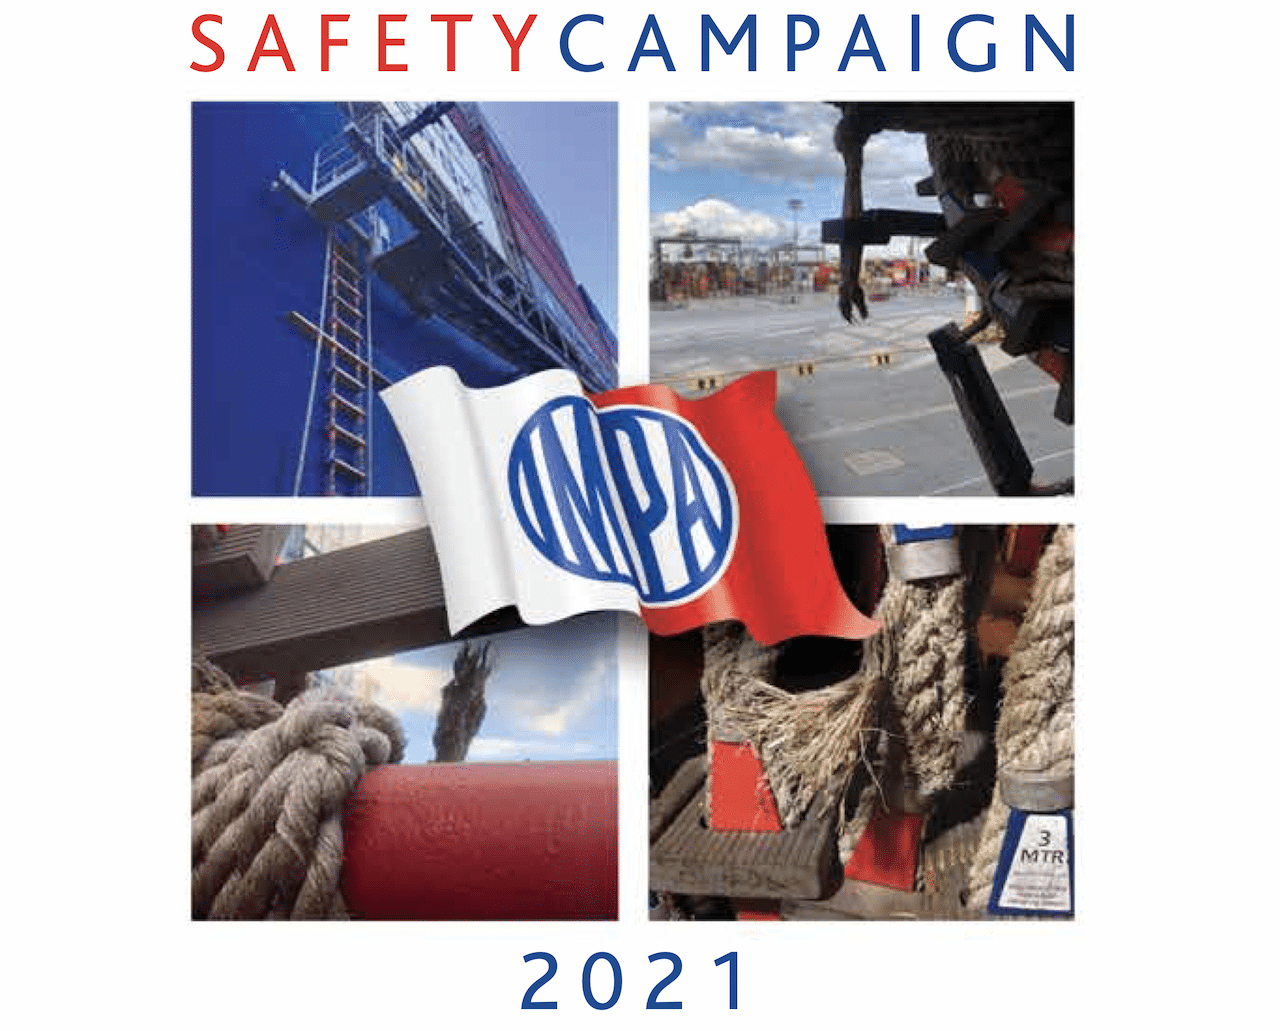 IMPA – IMPA SAFETY CAMPAIGN Report is available